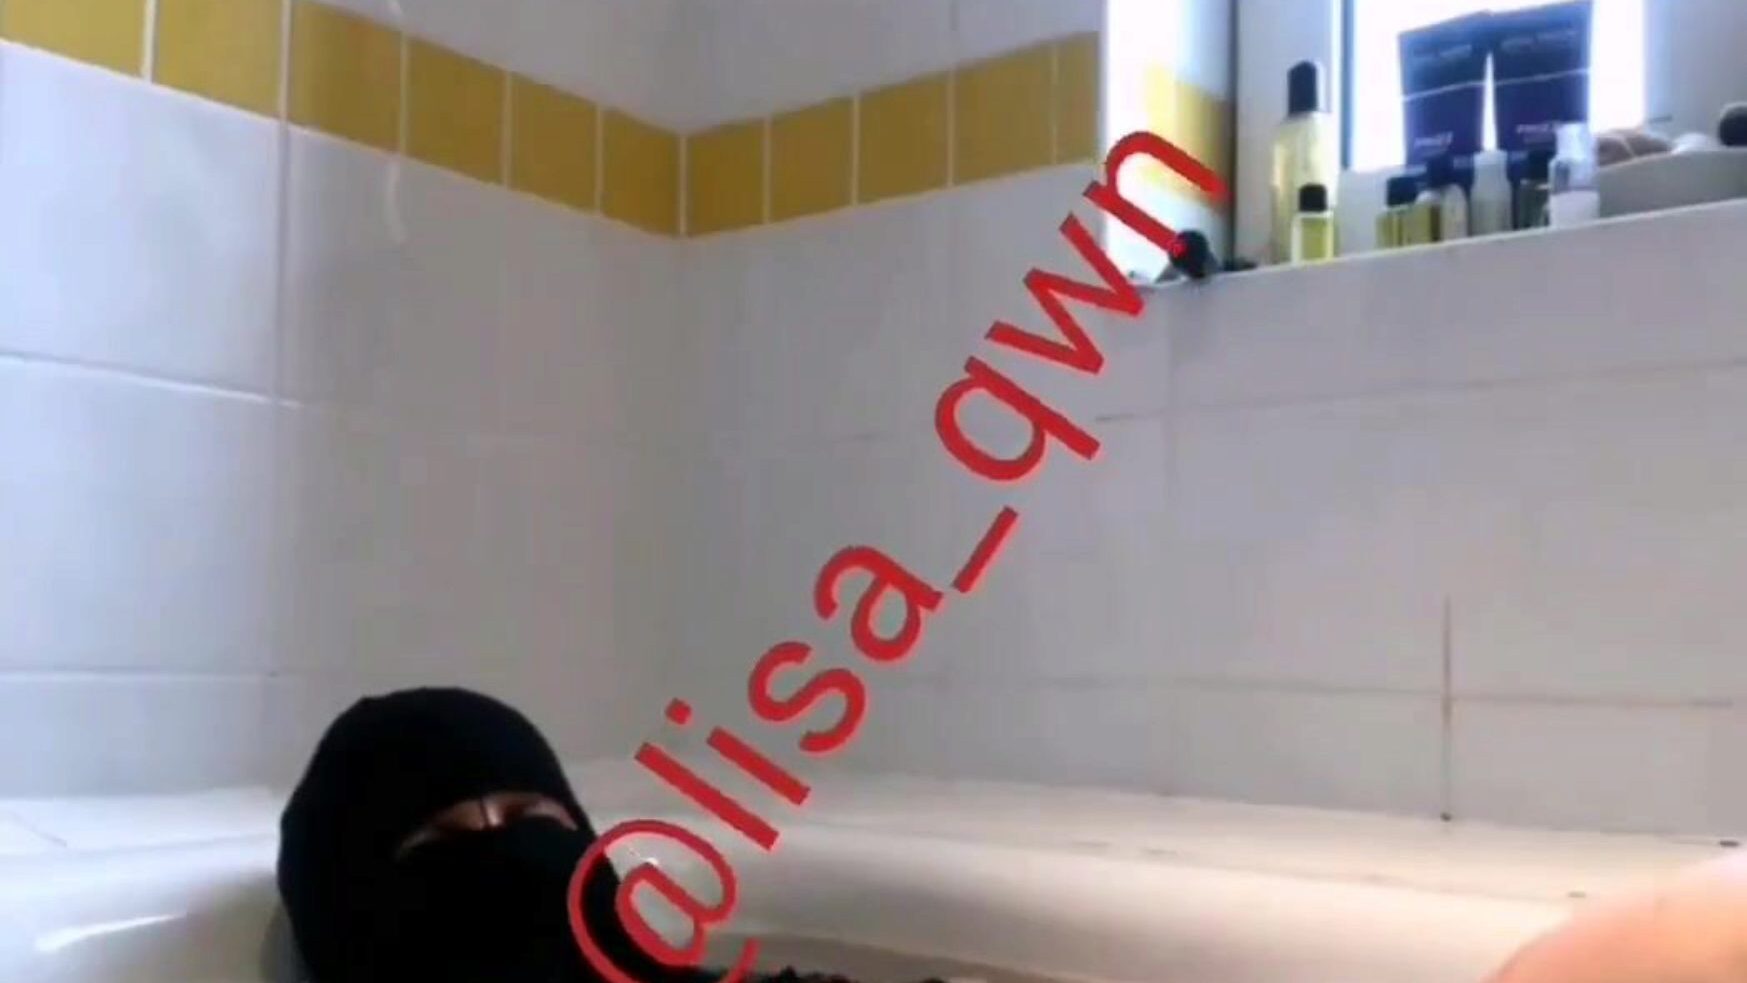 niqab hot 0998: free hot xnx hd porn video e7 - xhamster watch niqab hot 0998 tube fuckfest video free on xhamster, with the dominine collection of arab hot xnx, milf & hot red tube hd porno video gigs